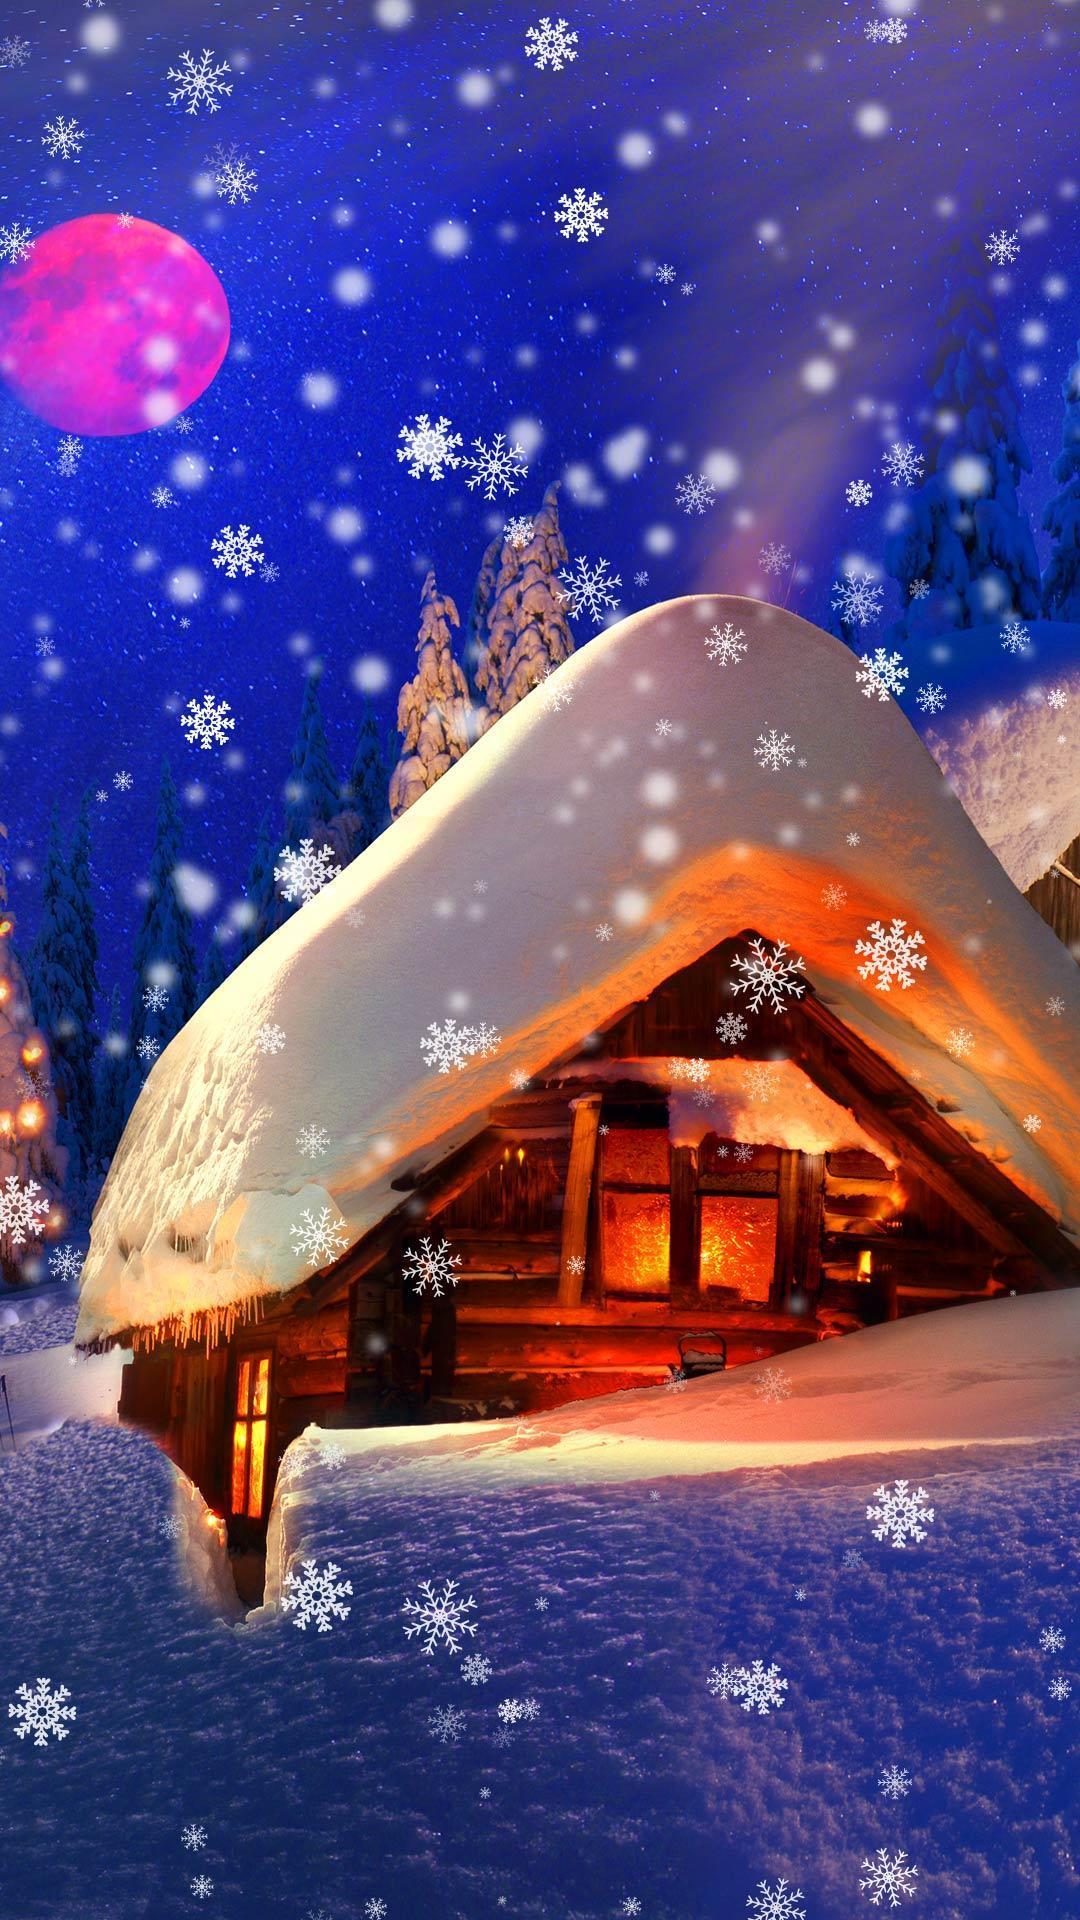 Frozen Winter Live Wallpaper for Android